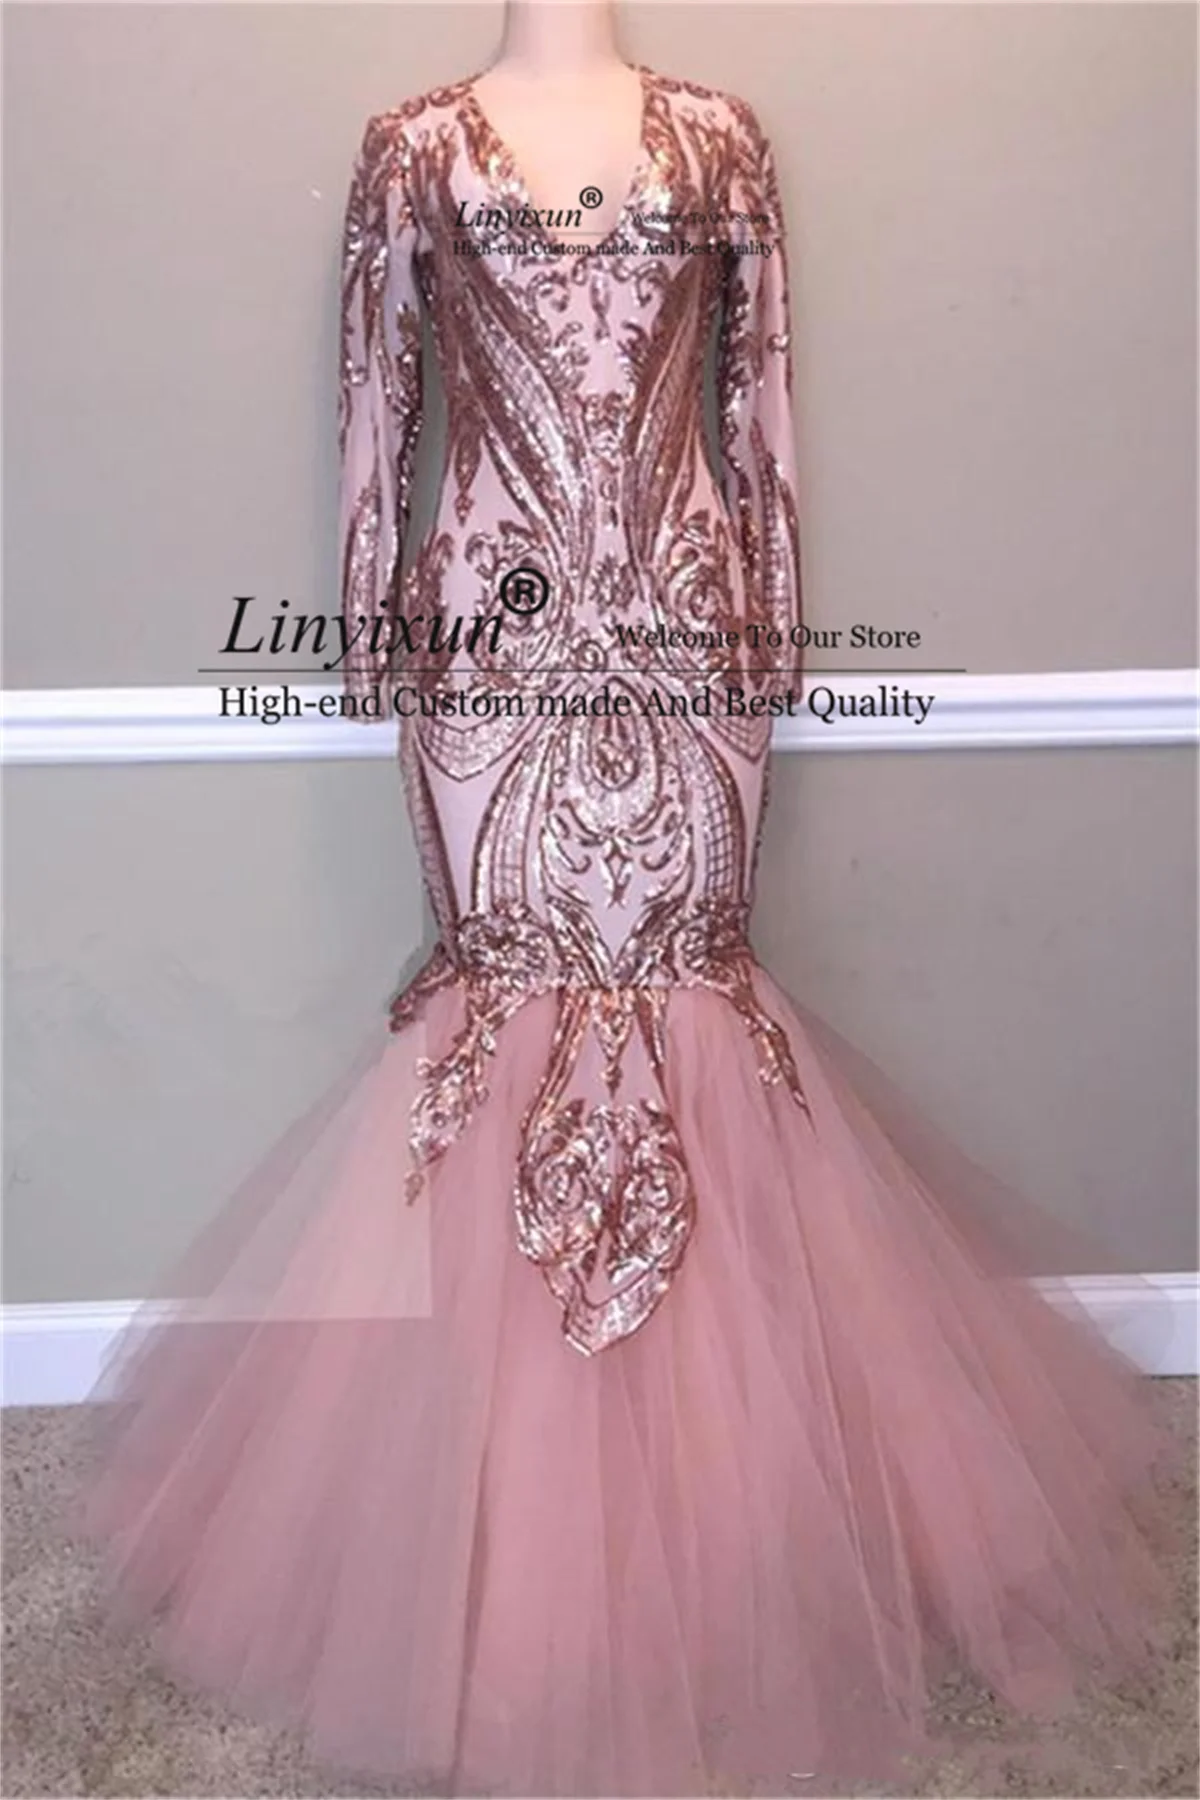 

Blush Pink Sequined Mermaid Prom Dresses Sexy Shinny Long Sleeve Formal Evening Gown Appliques Lace Pageant Party Dress 2022